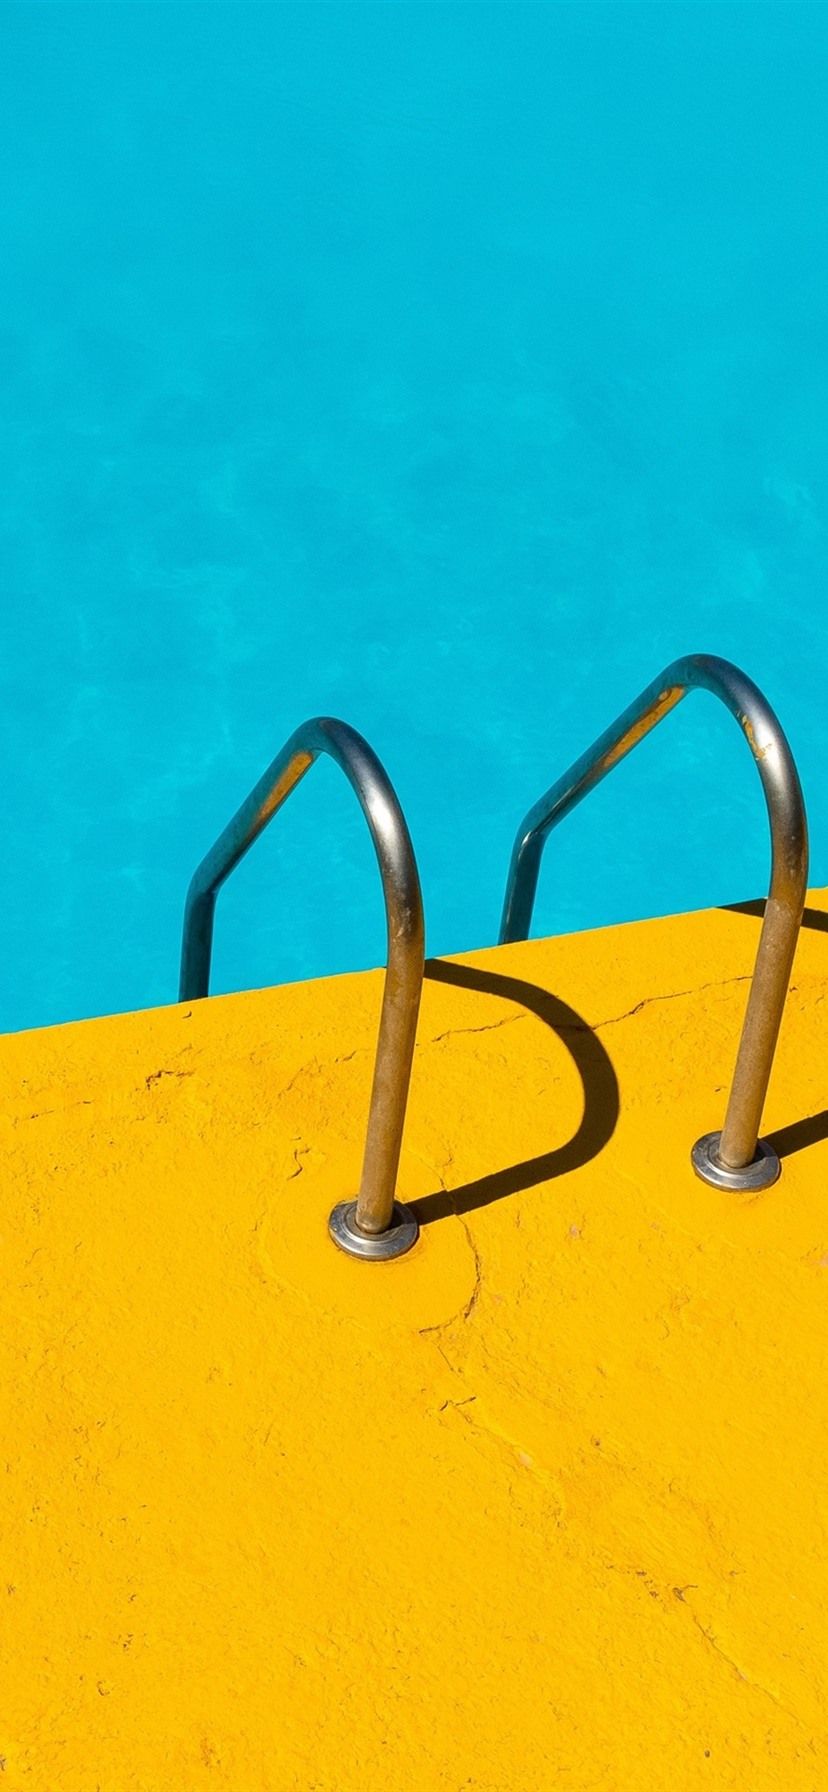 Handrail, Swim Pool, Blue And Yellow 1080x1920 IPhone 8 7 6 6S Plus Wallpaper, Background, Picture, Image